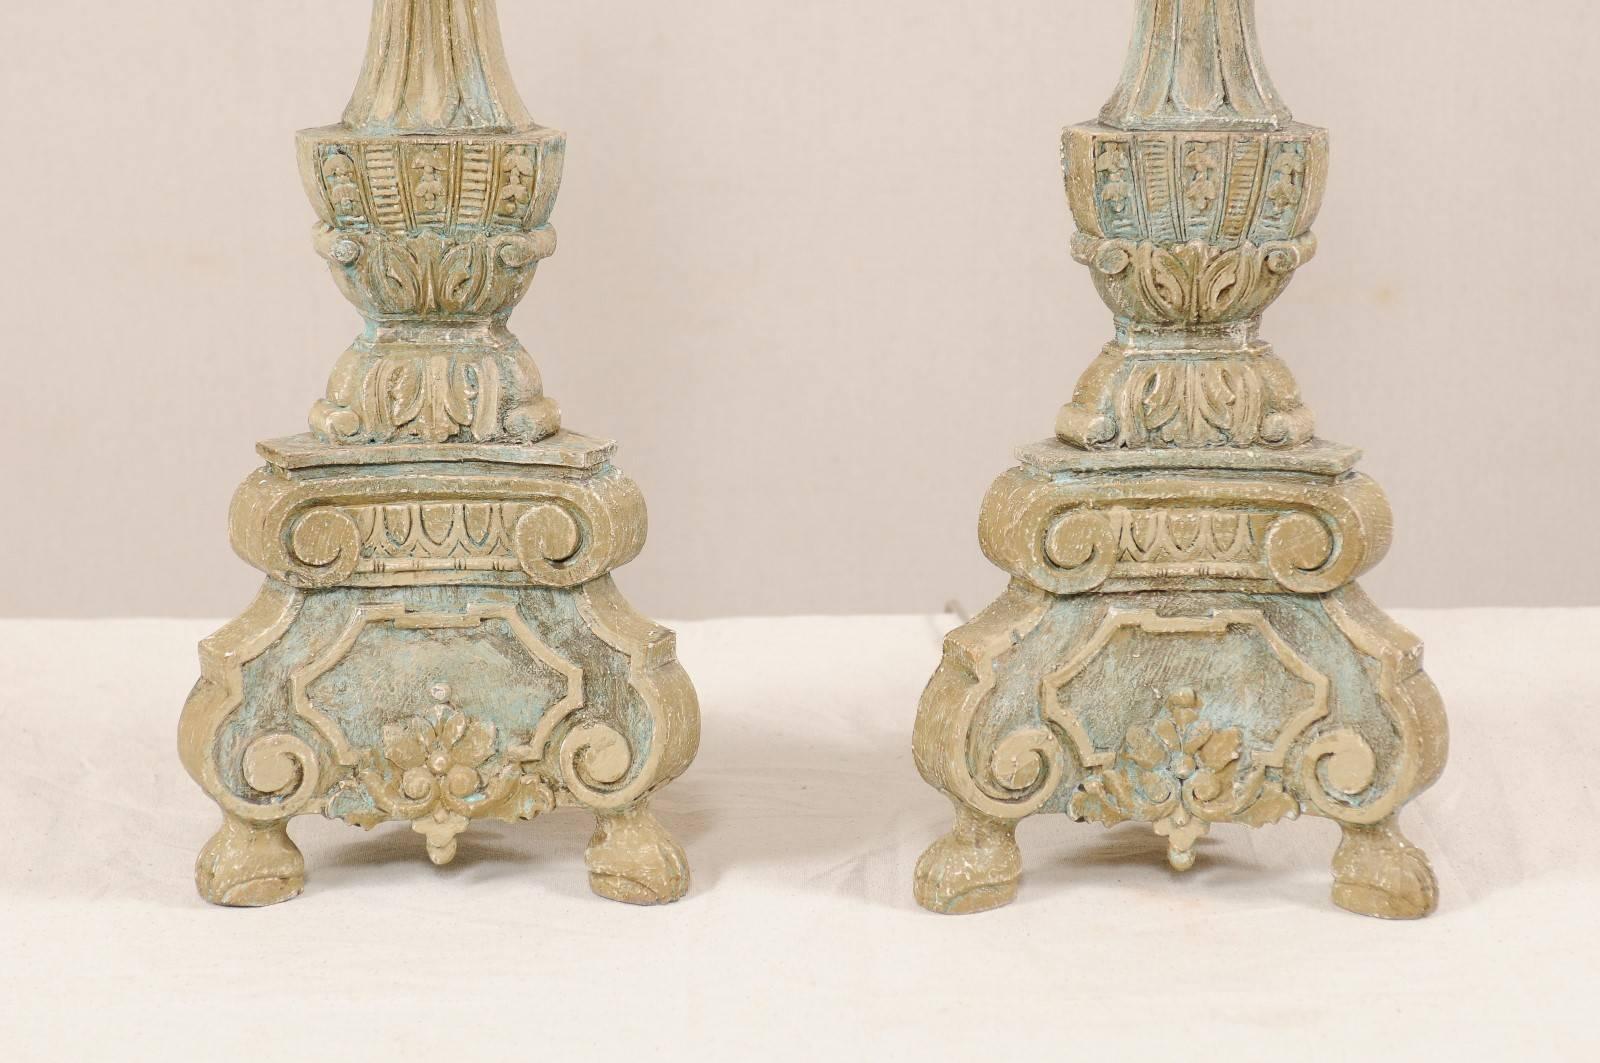 Contemporary Pair of Italian Style Ornate Hand-Carved and Painted Tall Table Lamps